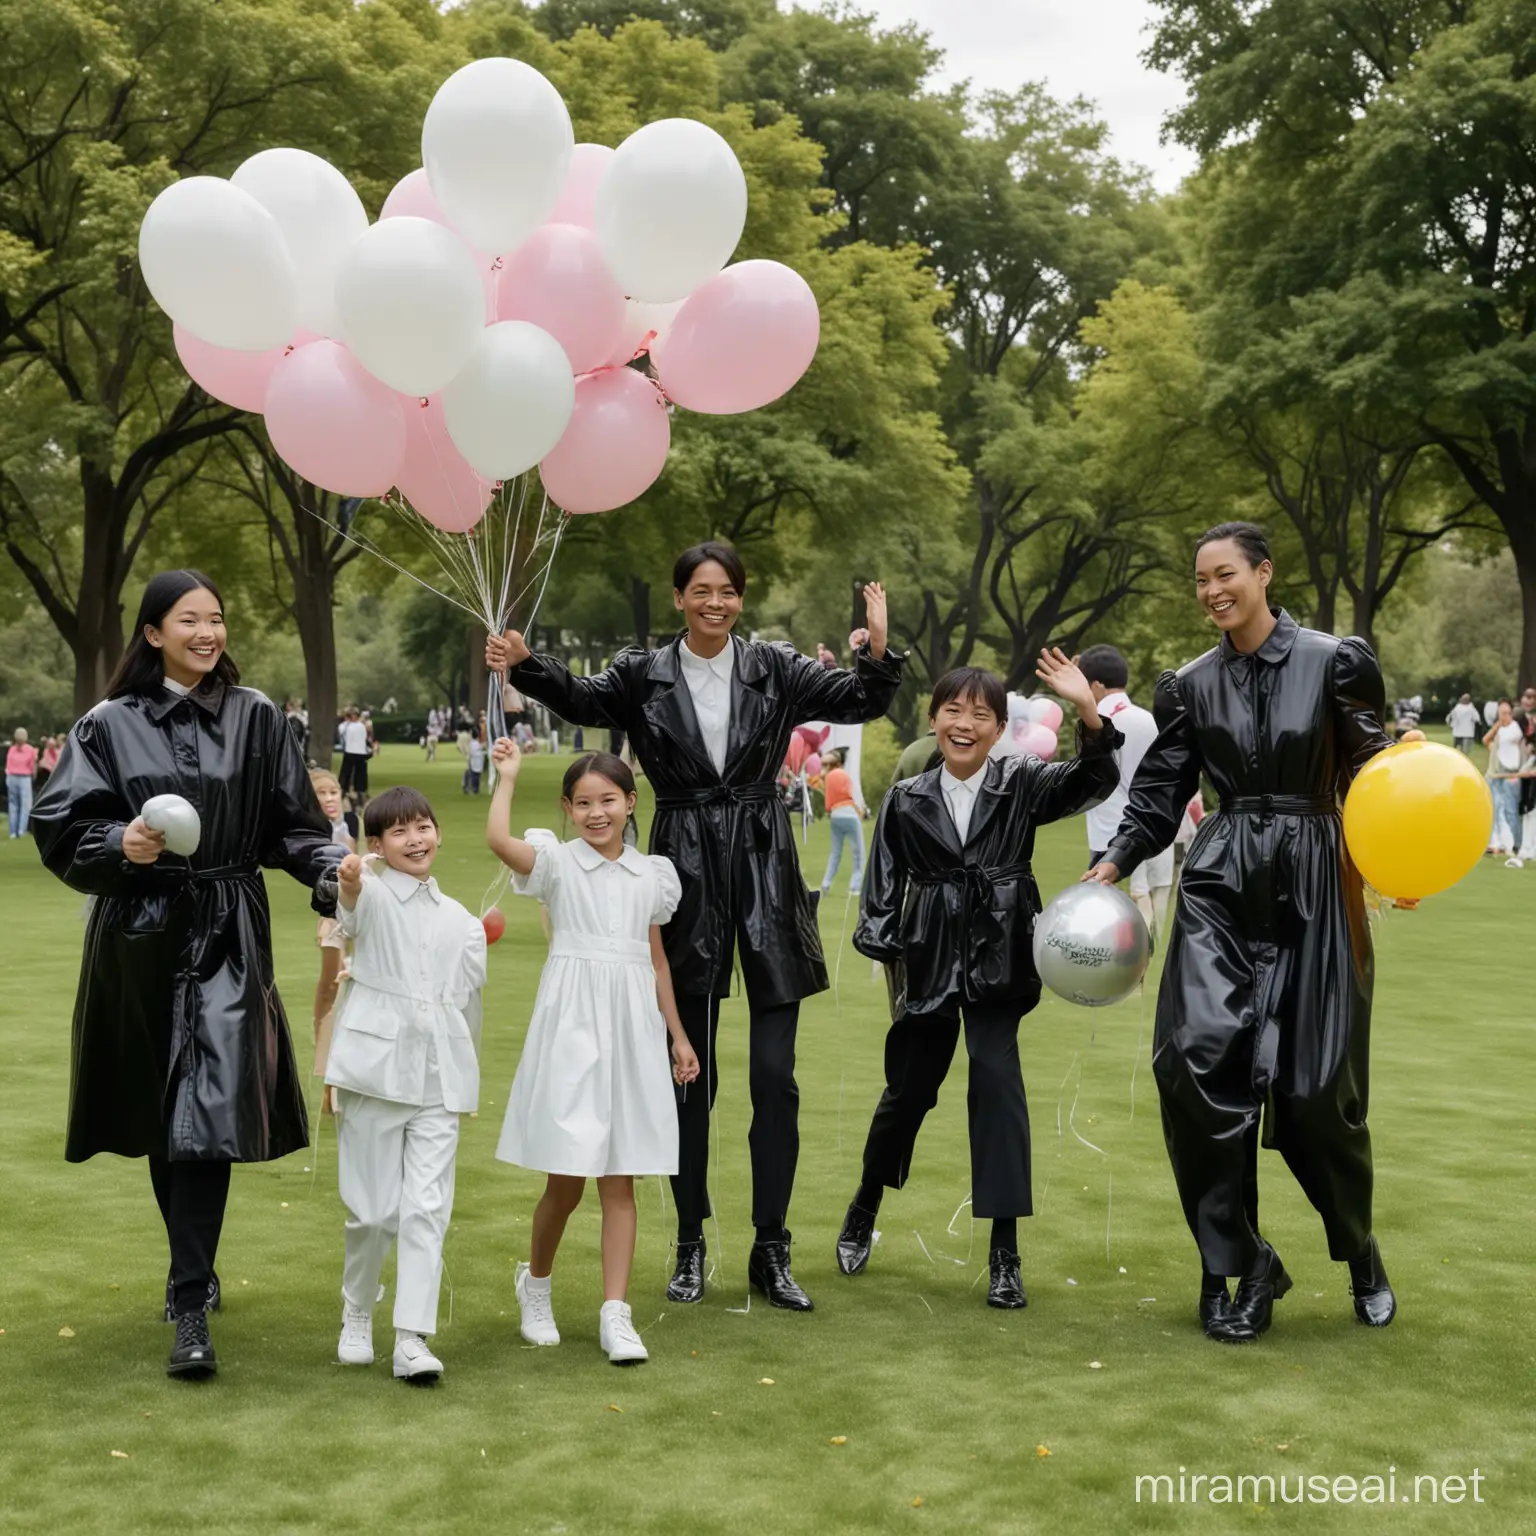 Show me a Balenciaga advertising campaign with adults and their children in a park playing with balloons. There are four adults and four children: one white, one black, one Asian . They are dressed in Balenciaga and smiling.